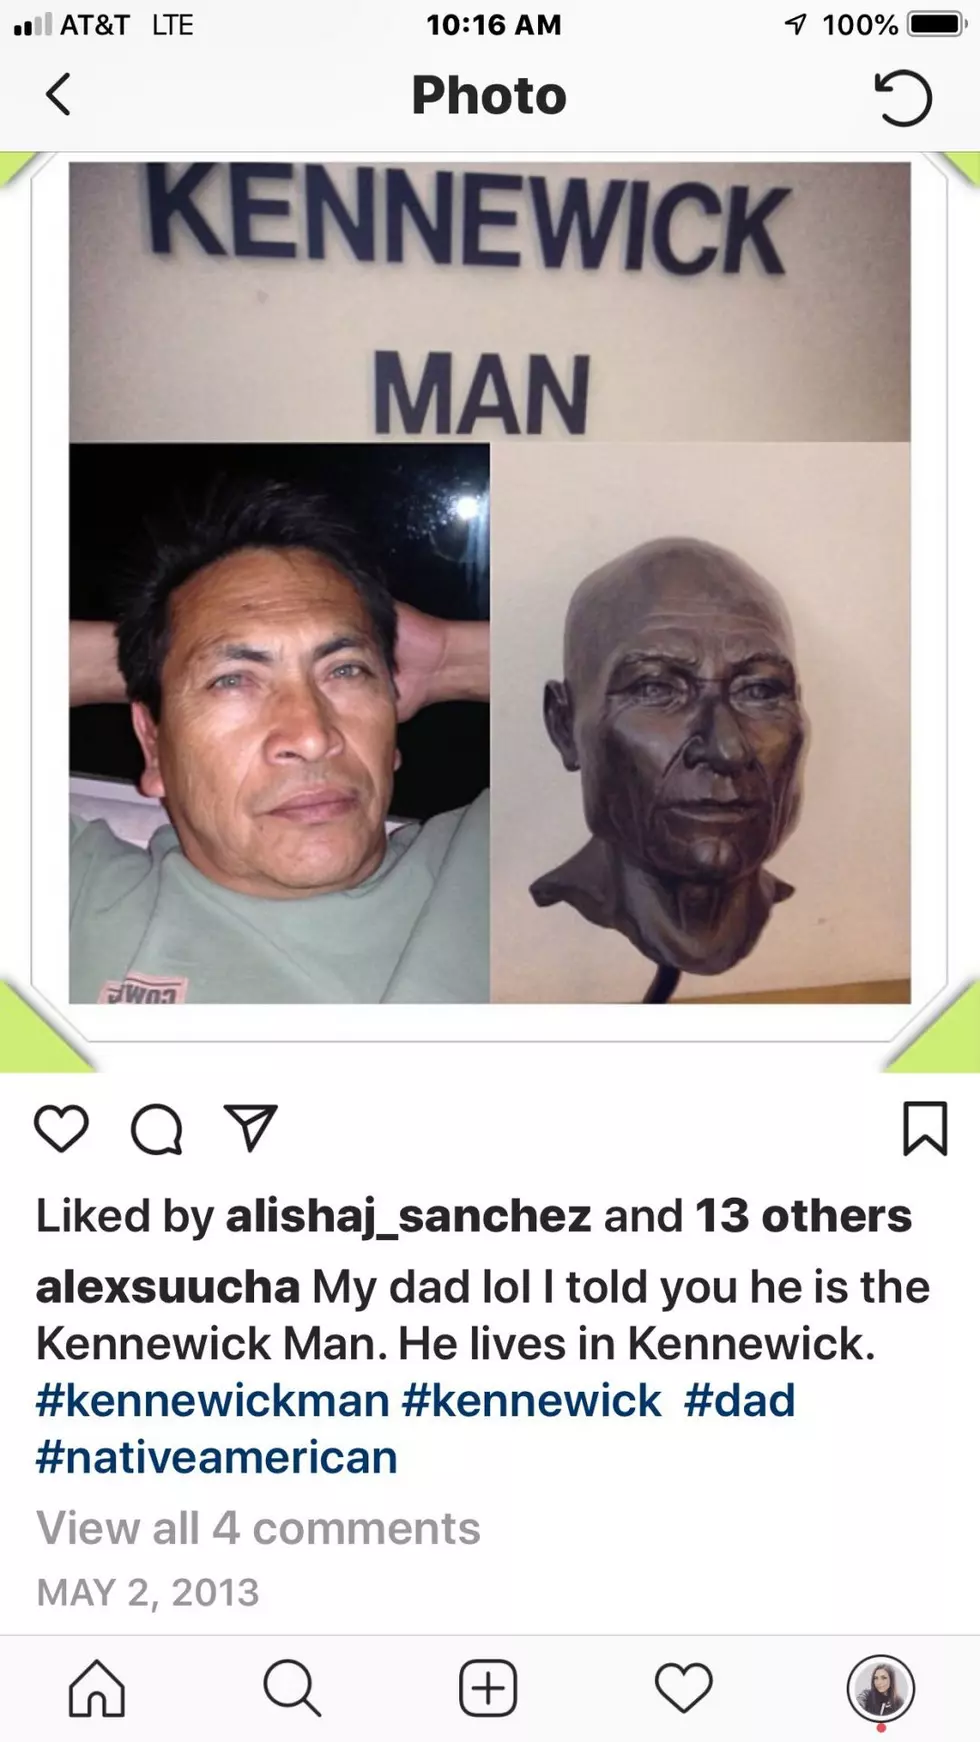 DNA Connects Local Man With Legendary "Kennewick Man"